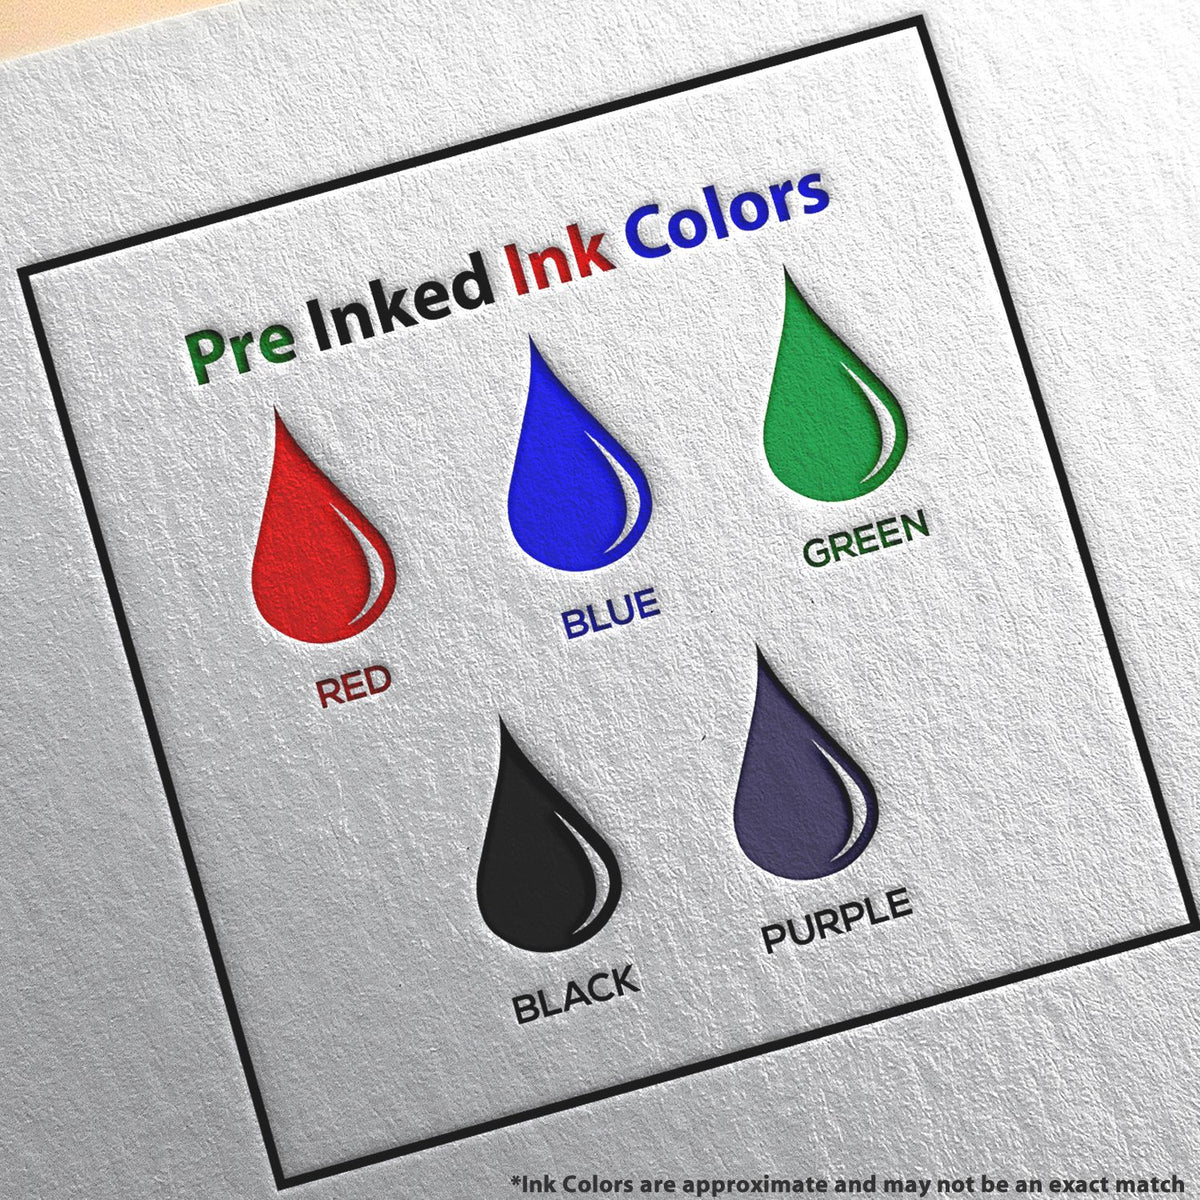 A picture showing the different ink colors or hues available for the PSI Ohio Notary Stamp product.